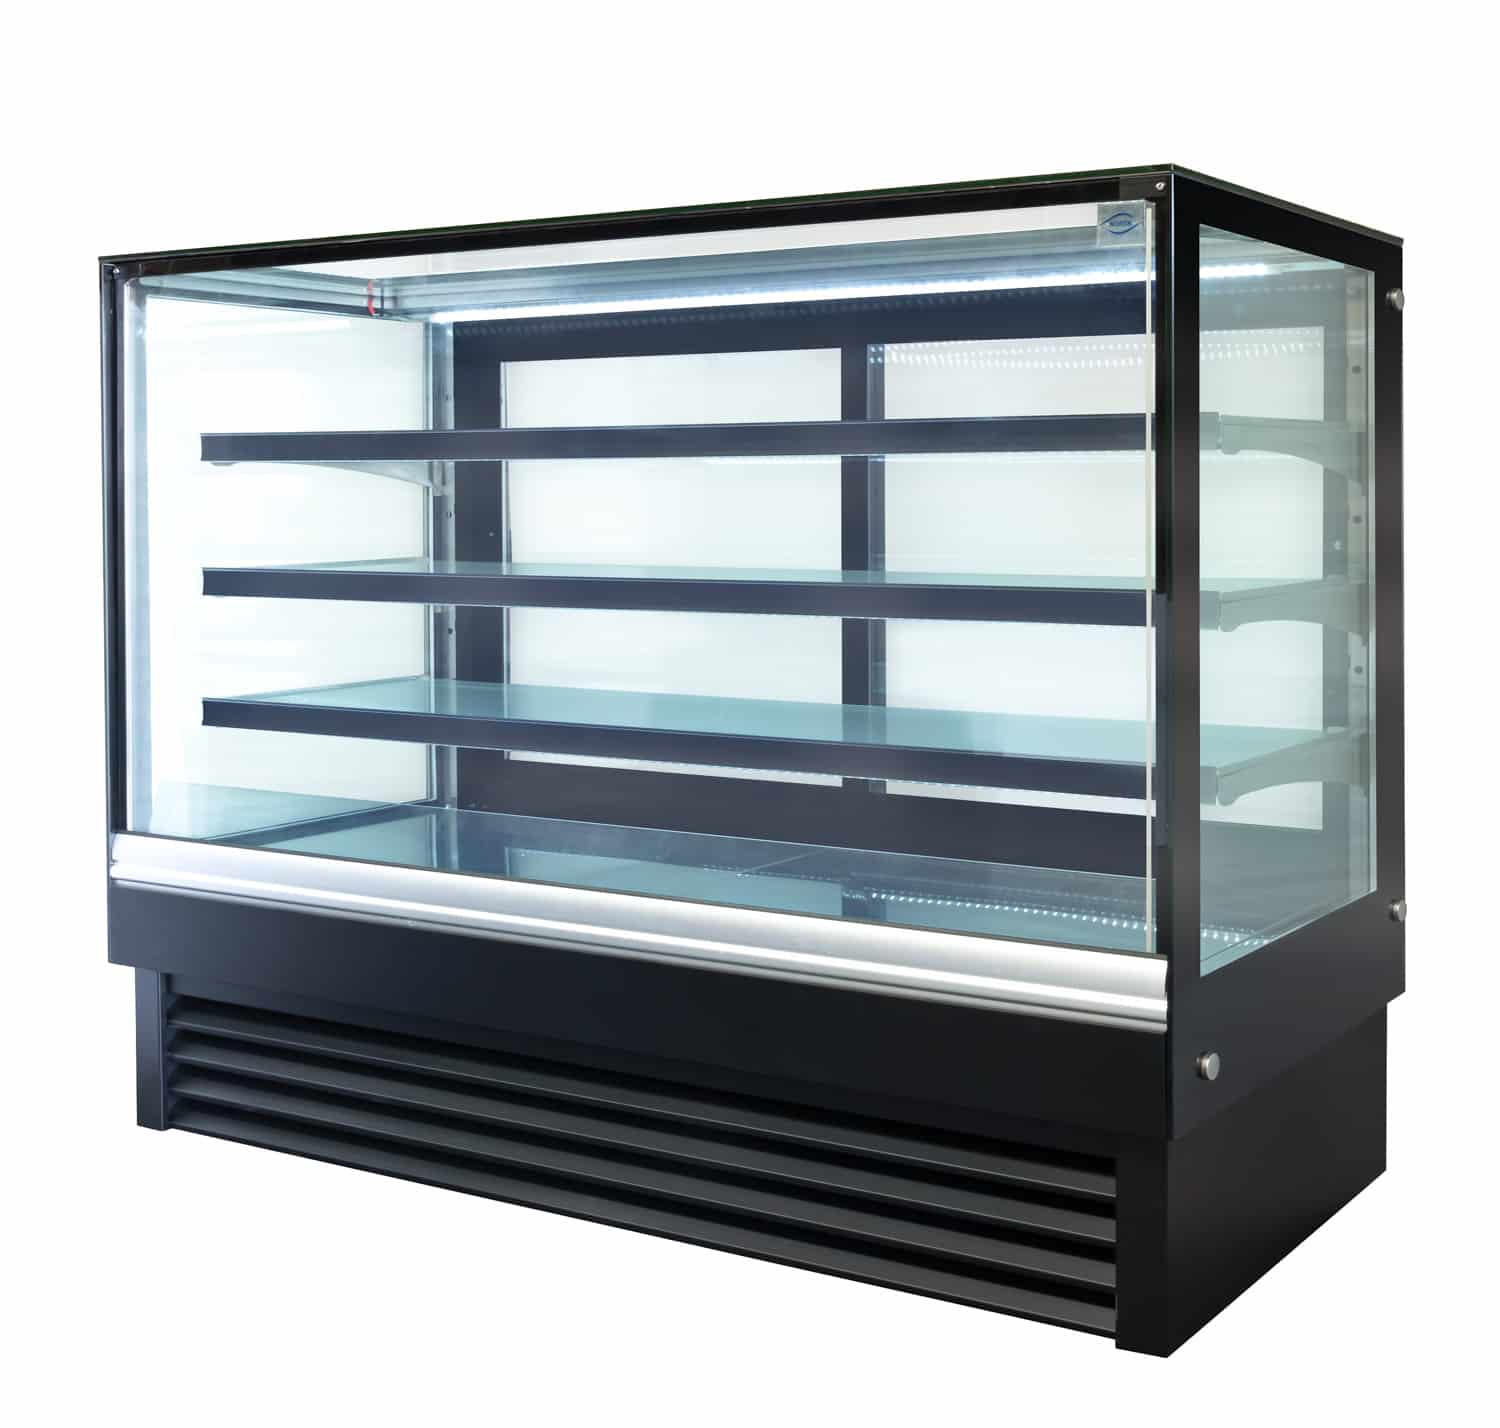 Norsk cake display fridge, 1800mm wide, angle view